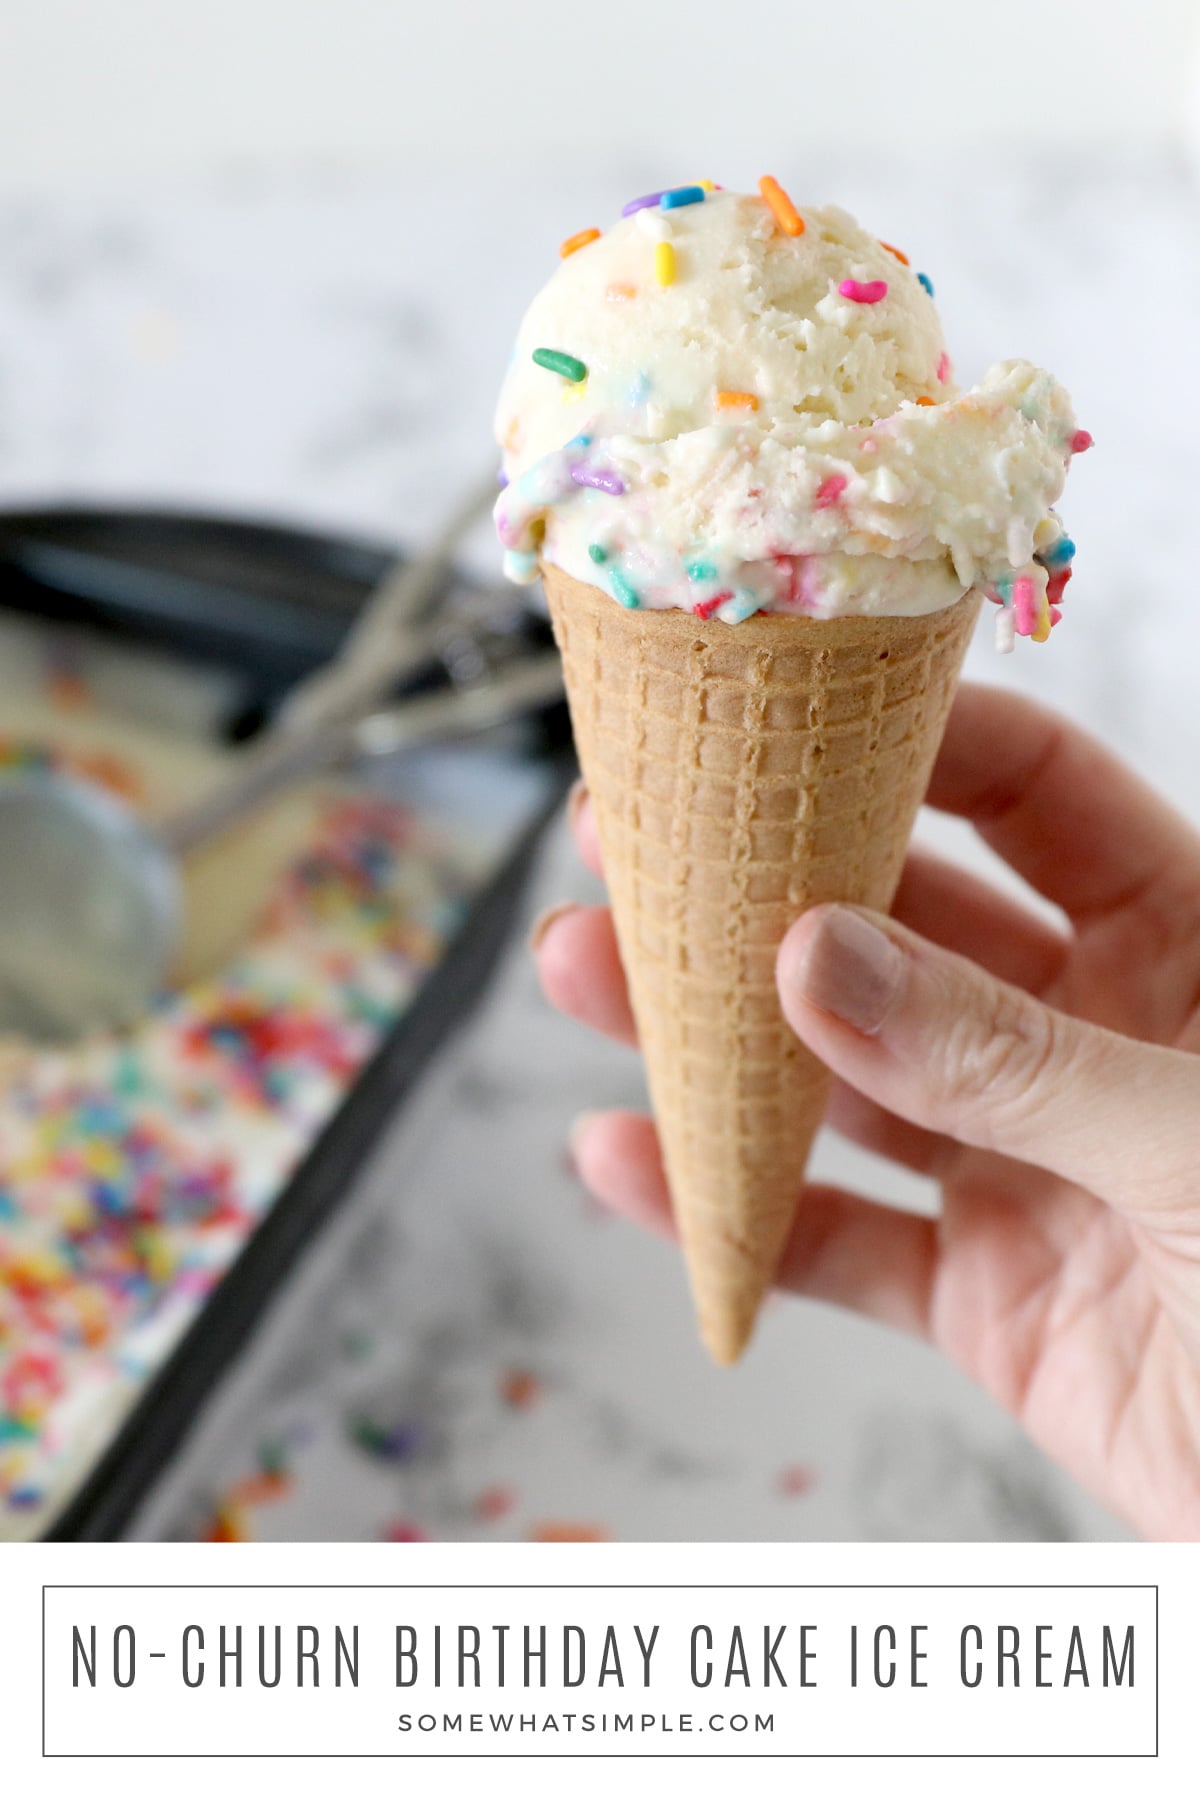 Birthdays aren’t complete without cake and ice cream, and this EASY recipe combines them both! This Birthday cake Ice Cream is creamy and delicious! via @somewhatsimple